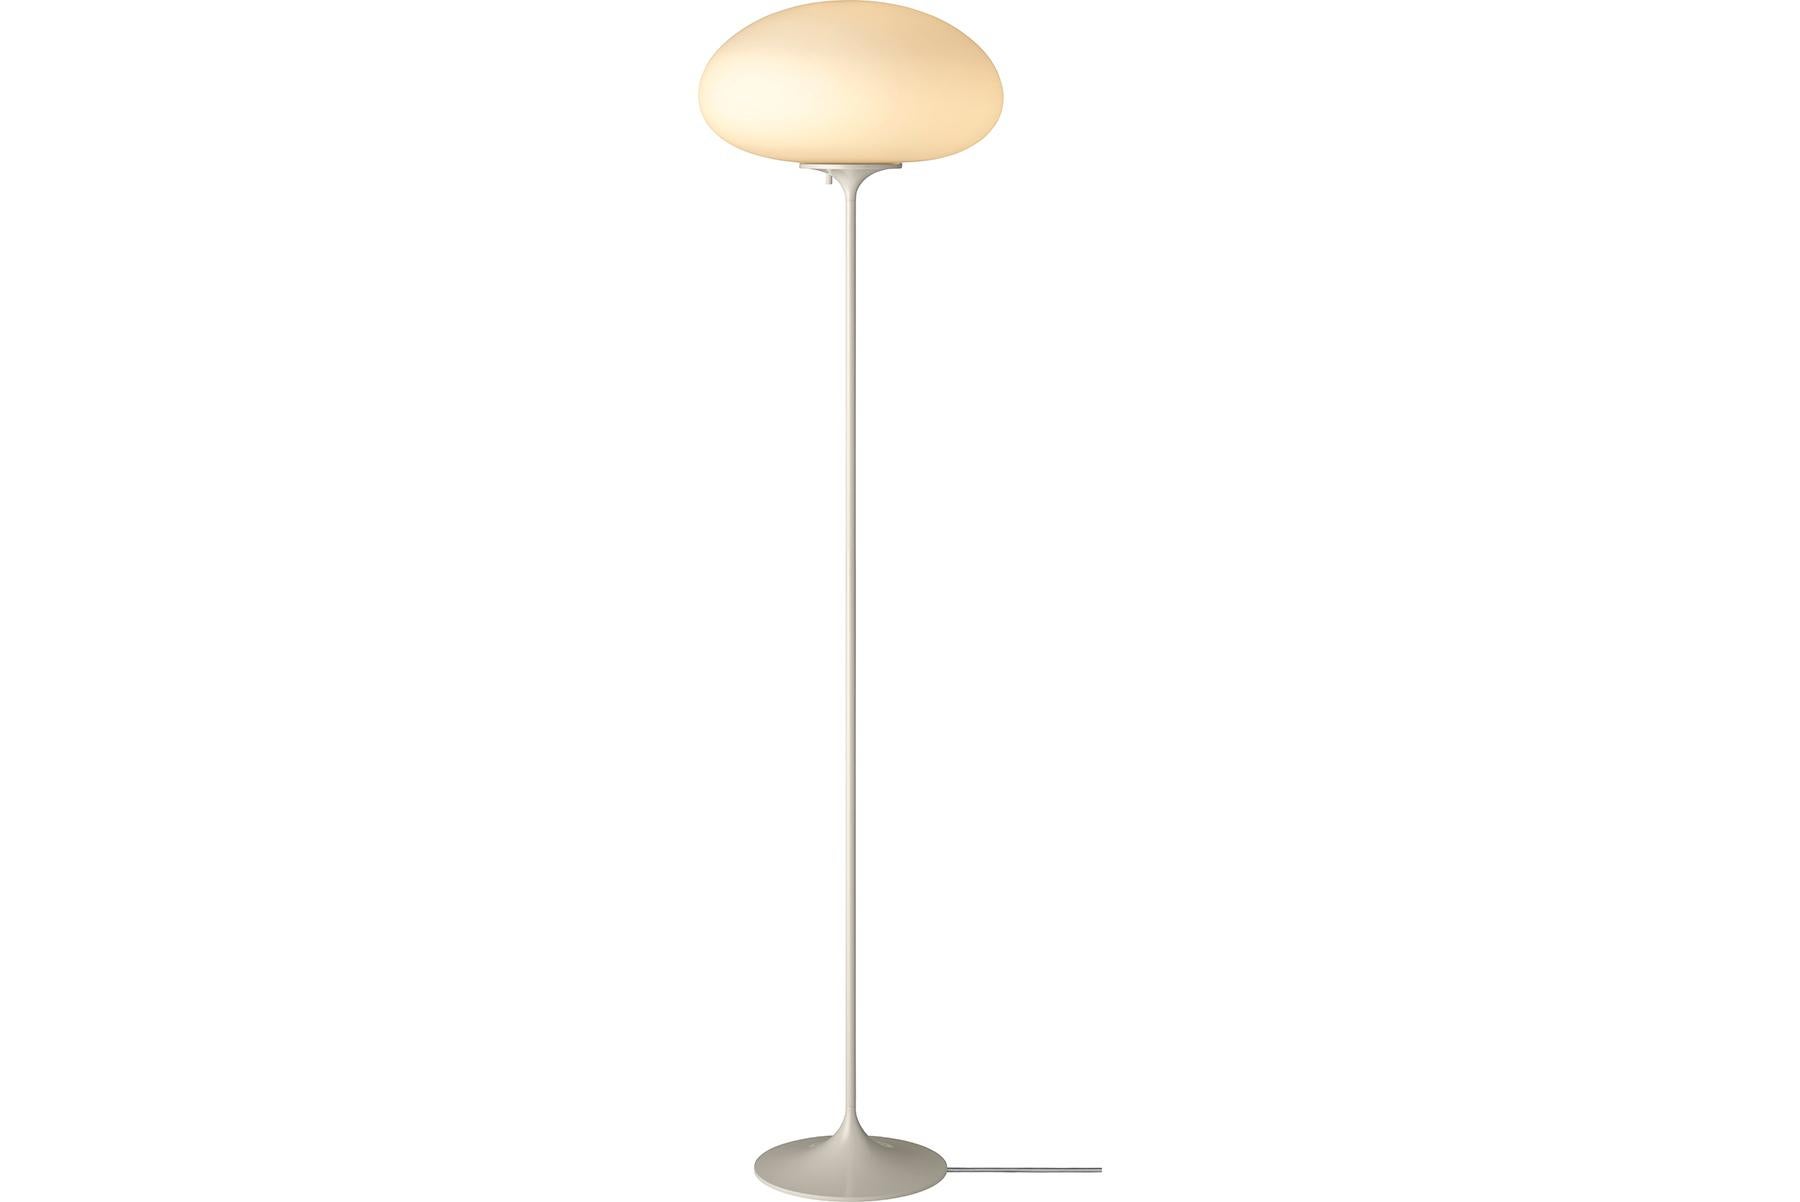 Stemlite Floor Lamp, H150, Frosted Glass, Black Chrome In New Condition For Sale In Berkeley, CA